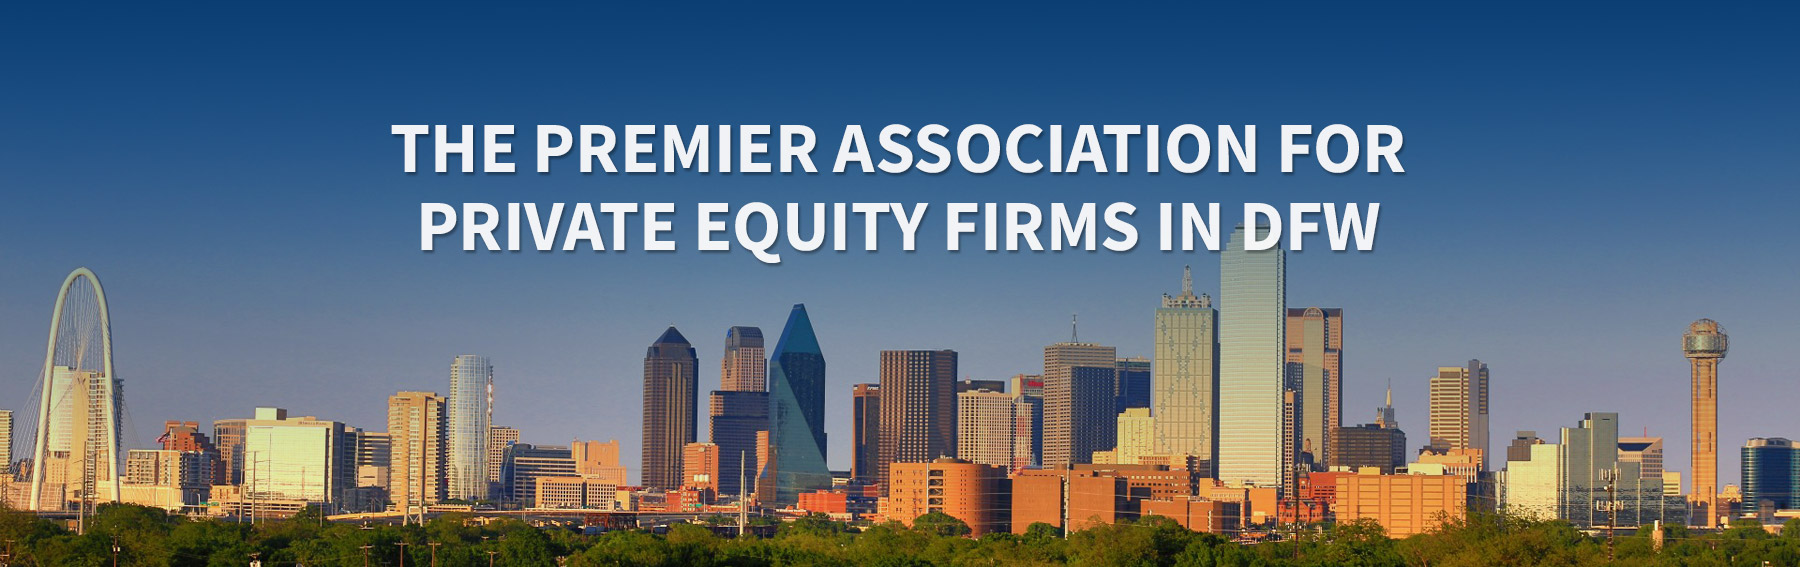 The Premier Association for Private Equity Firms in dfw